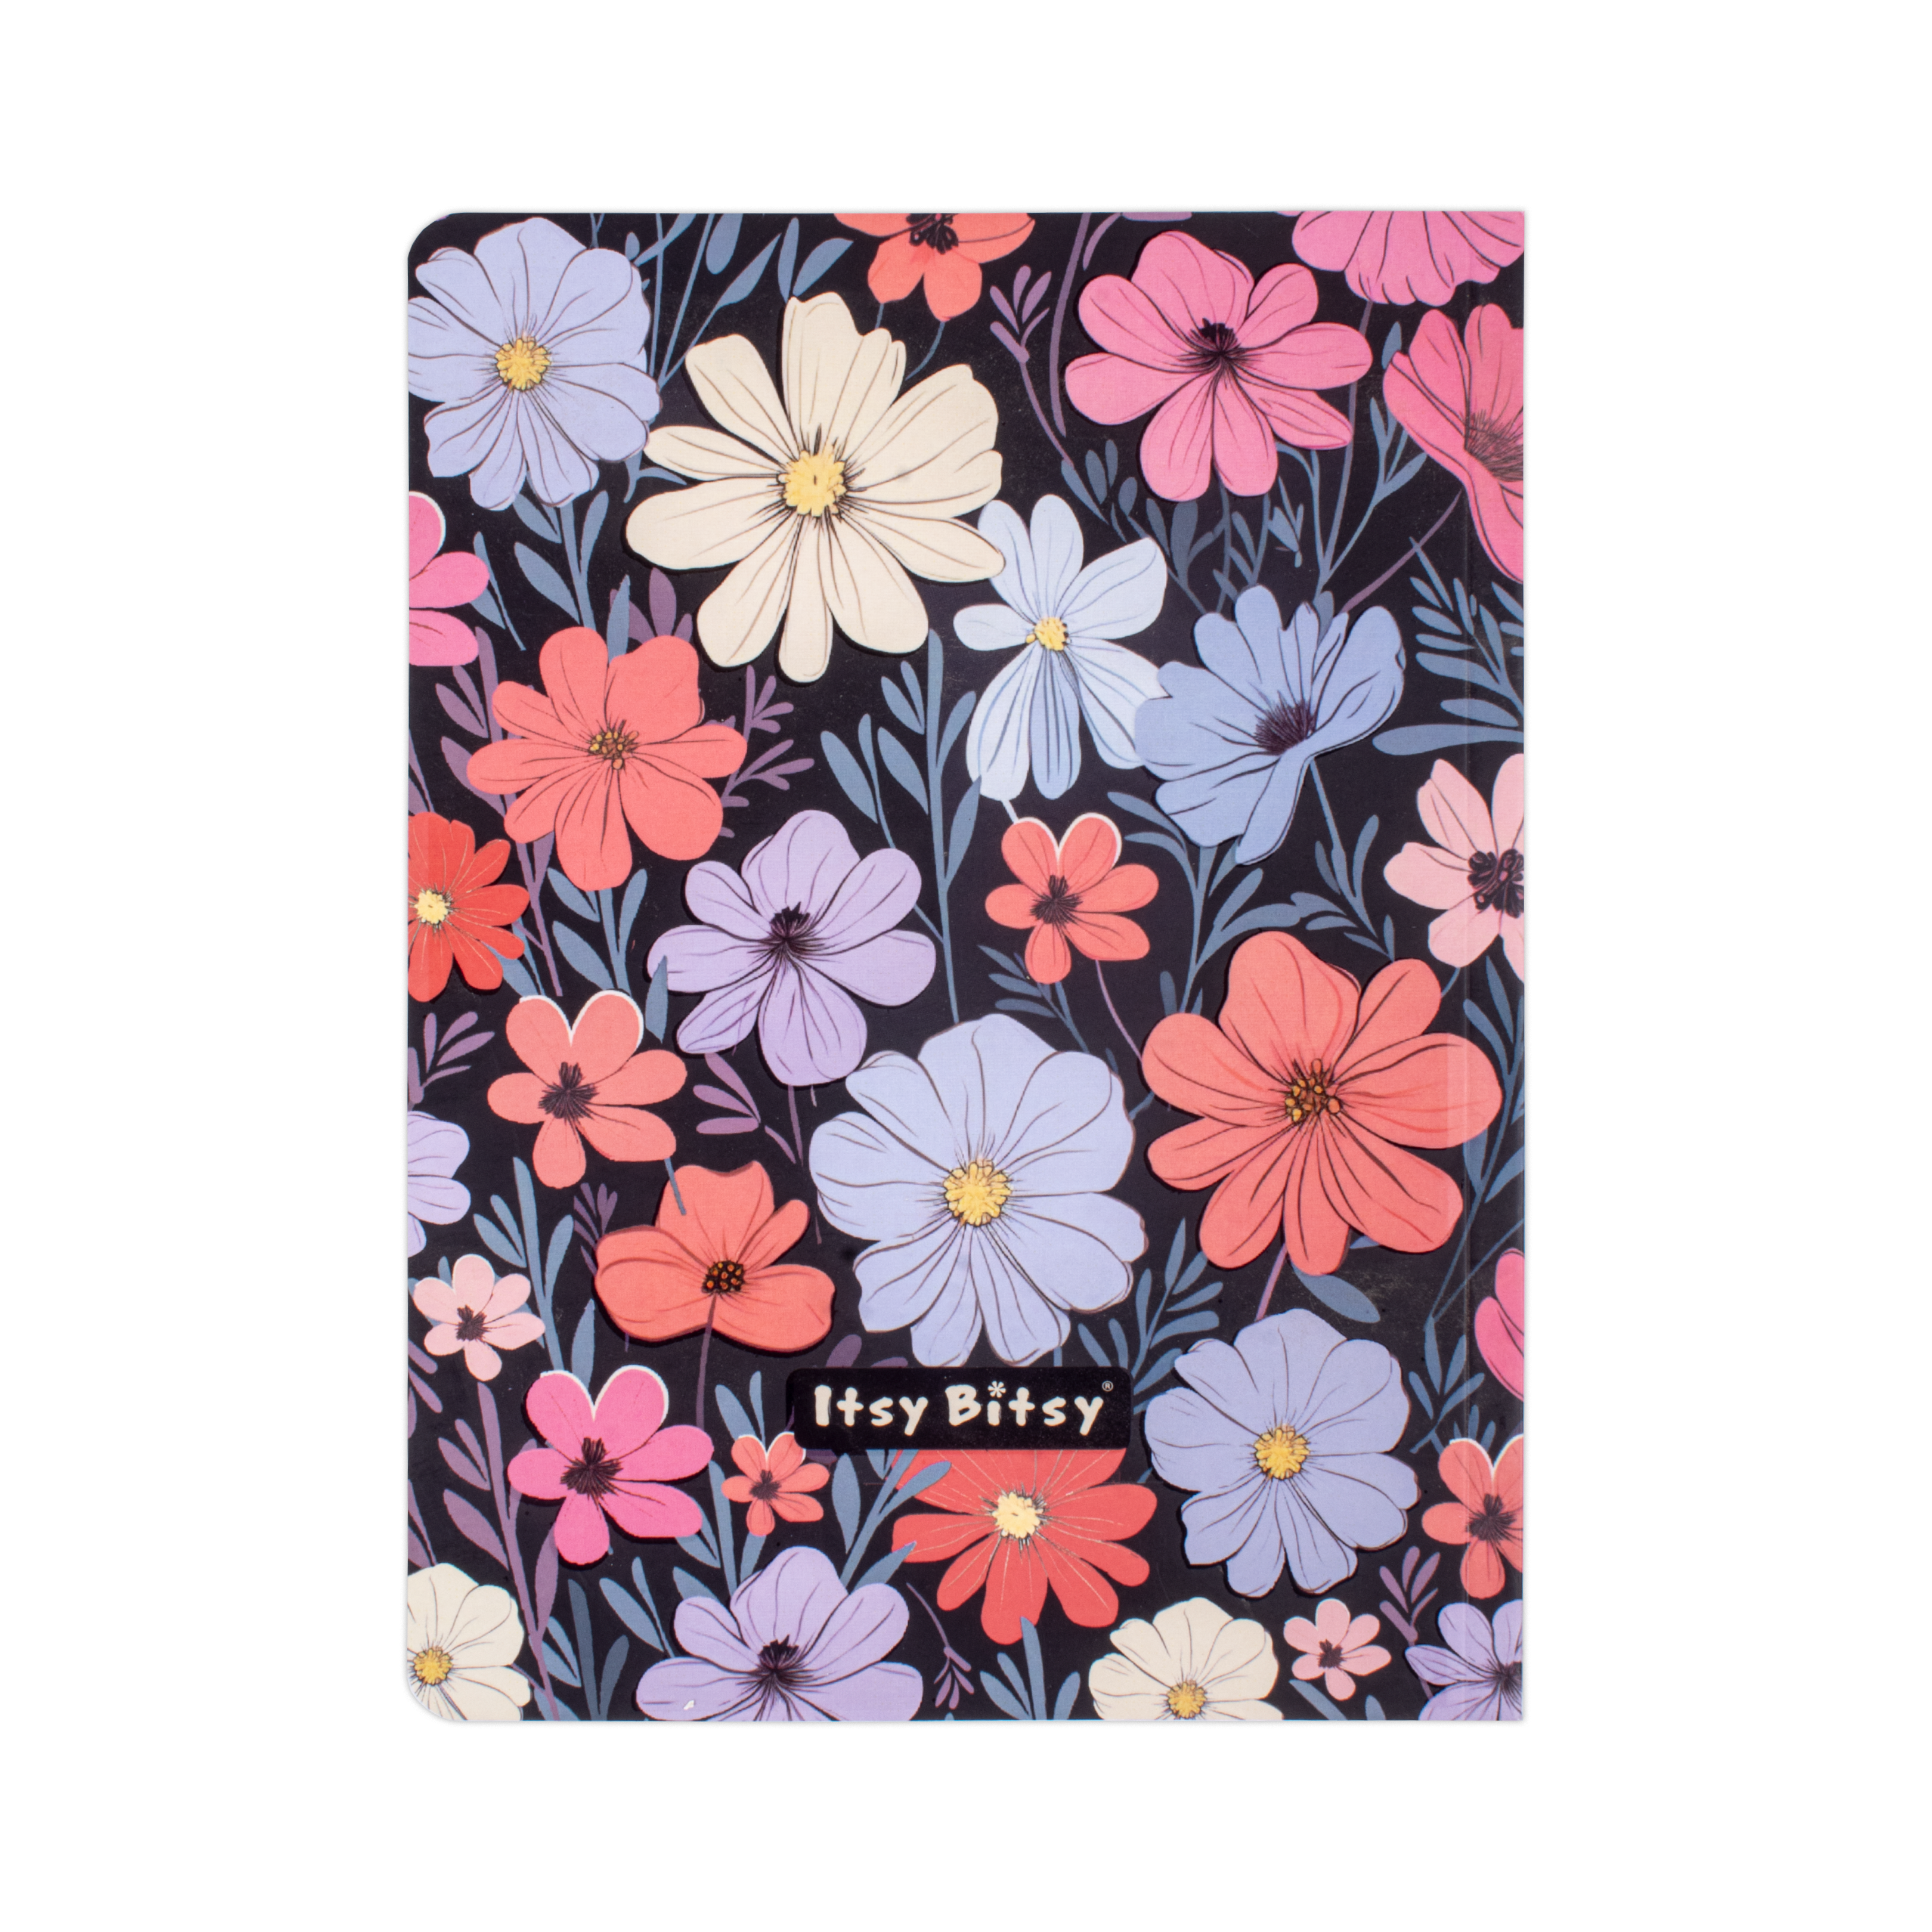 Softbound Ruled Notebook Flower Edge Printed A5 128pages 100gsm